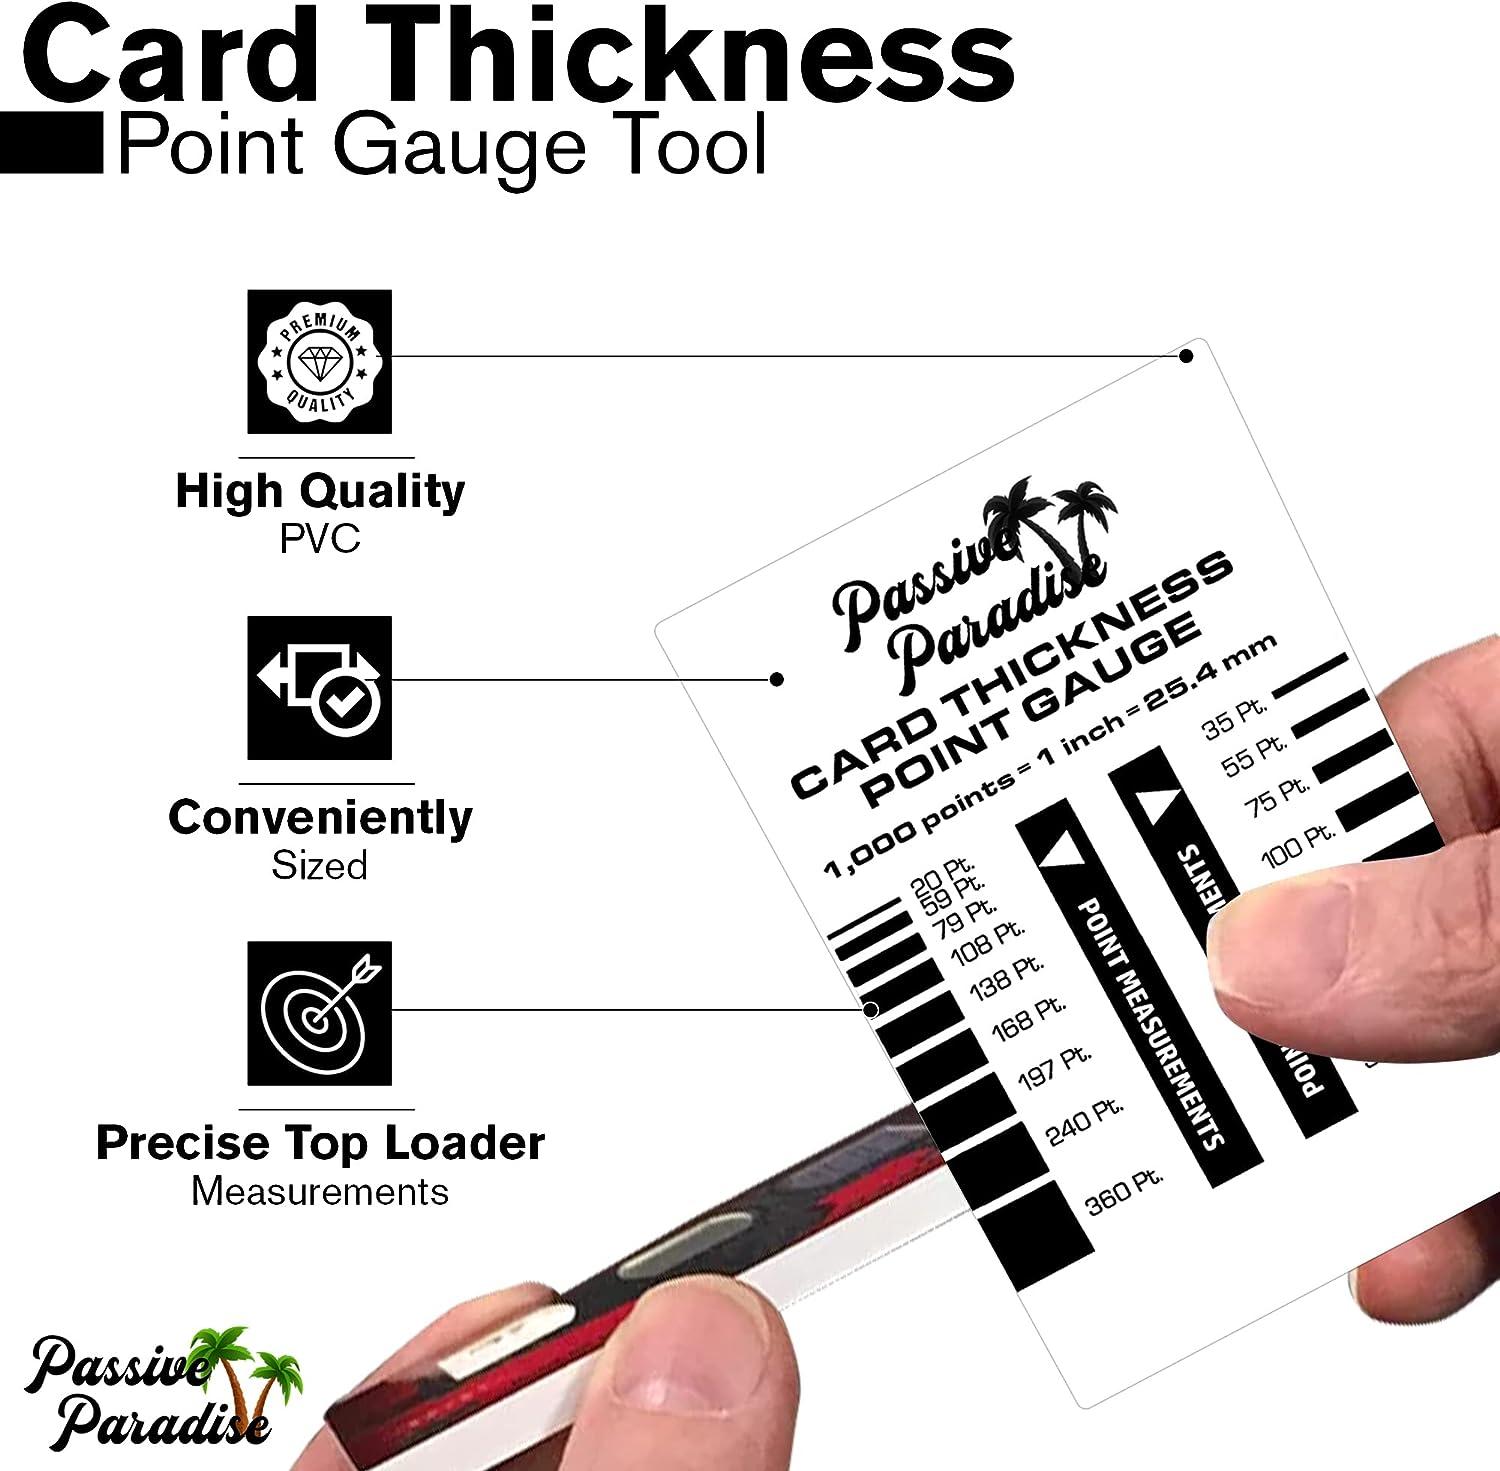 Passive Paradise Card Thickness Point Gauge Tool, Card Grading